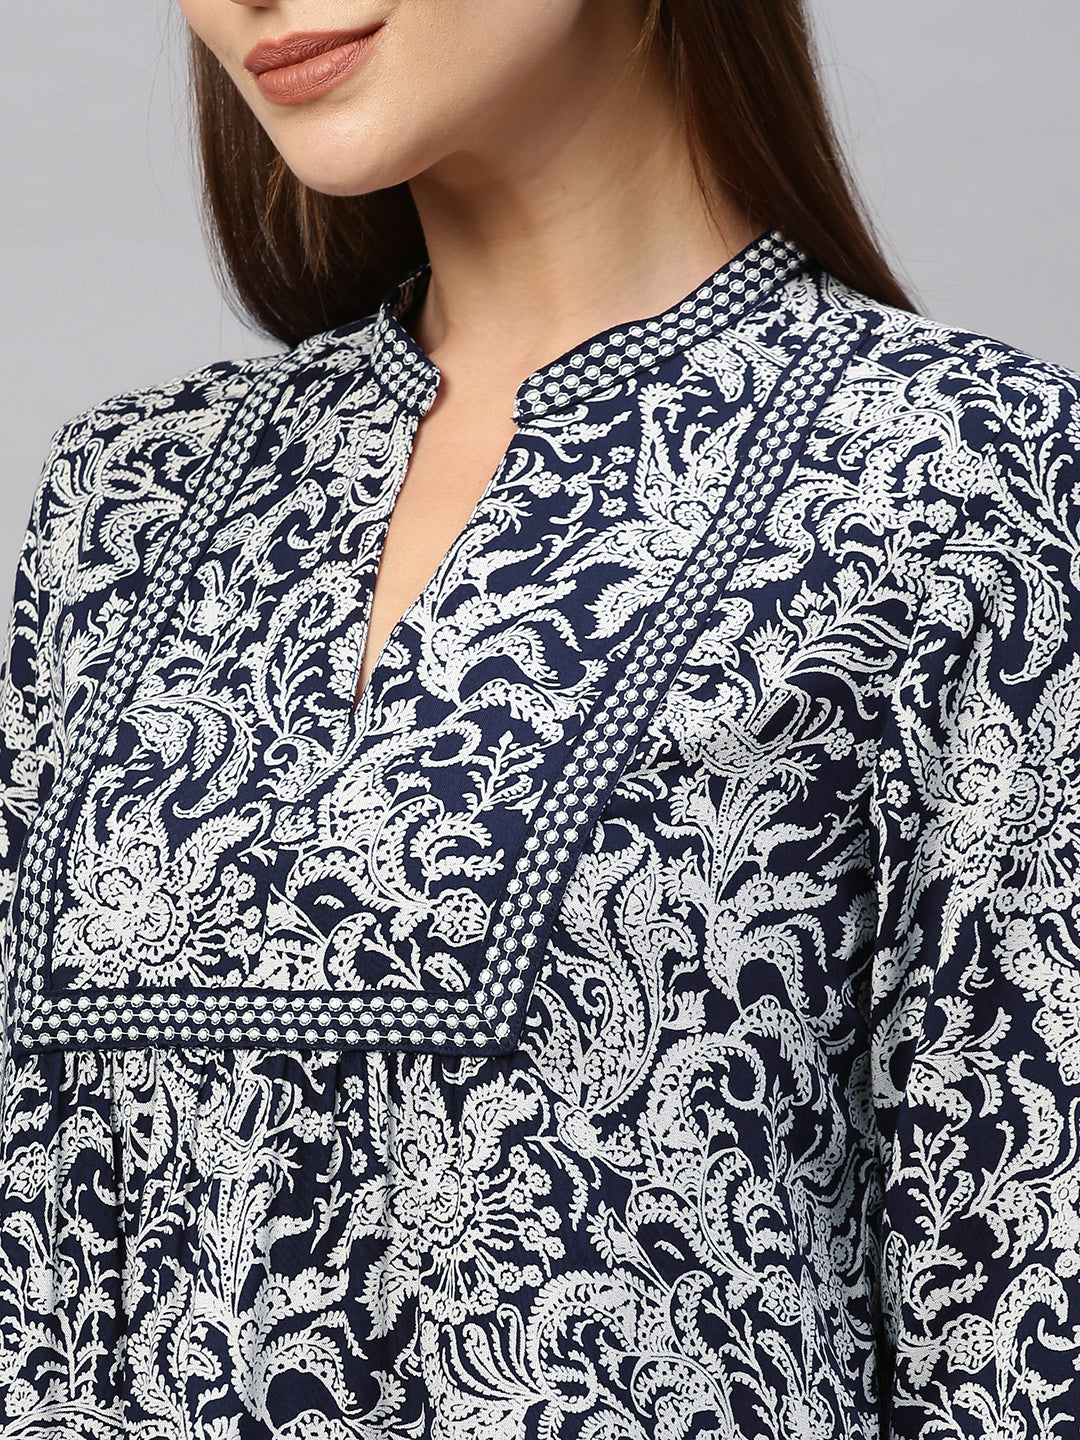 Paisley Printed Rayon Tunic Top With Embroidery Detailing